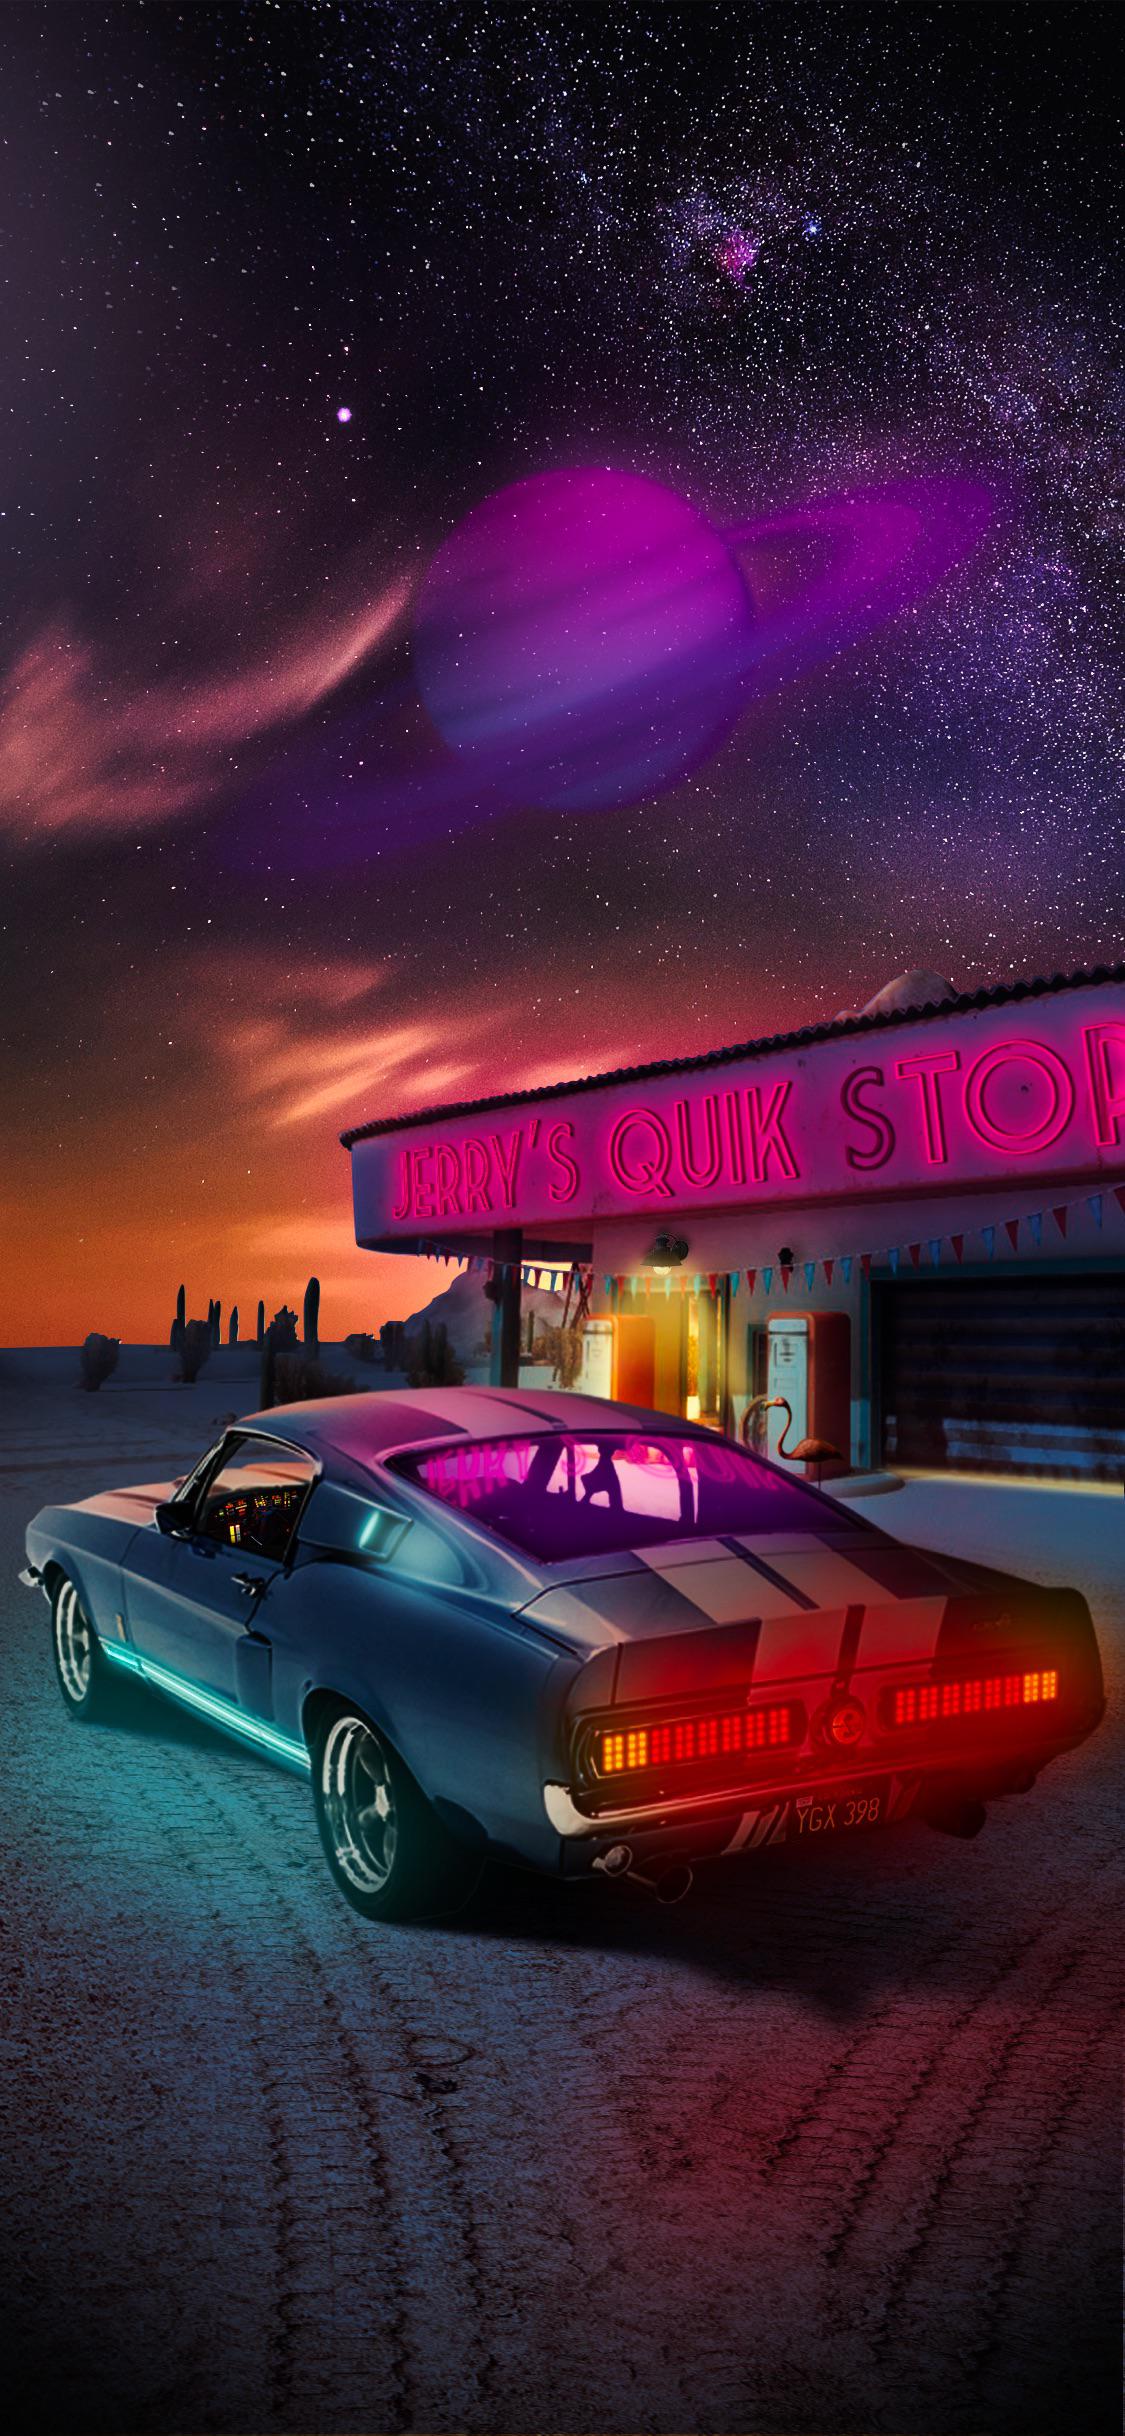 Made an iPhone X wallpaper for my fiancé with her dream car and favorite planet. Thought I would share it with all of you!